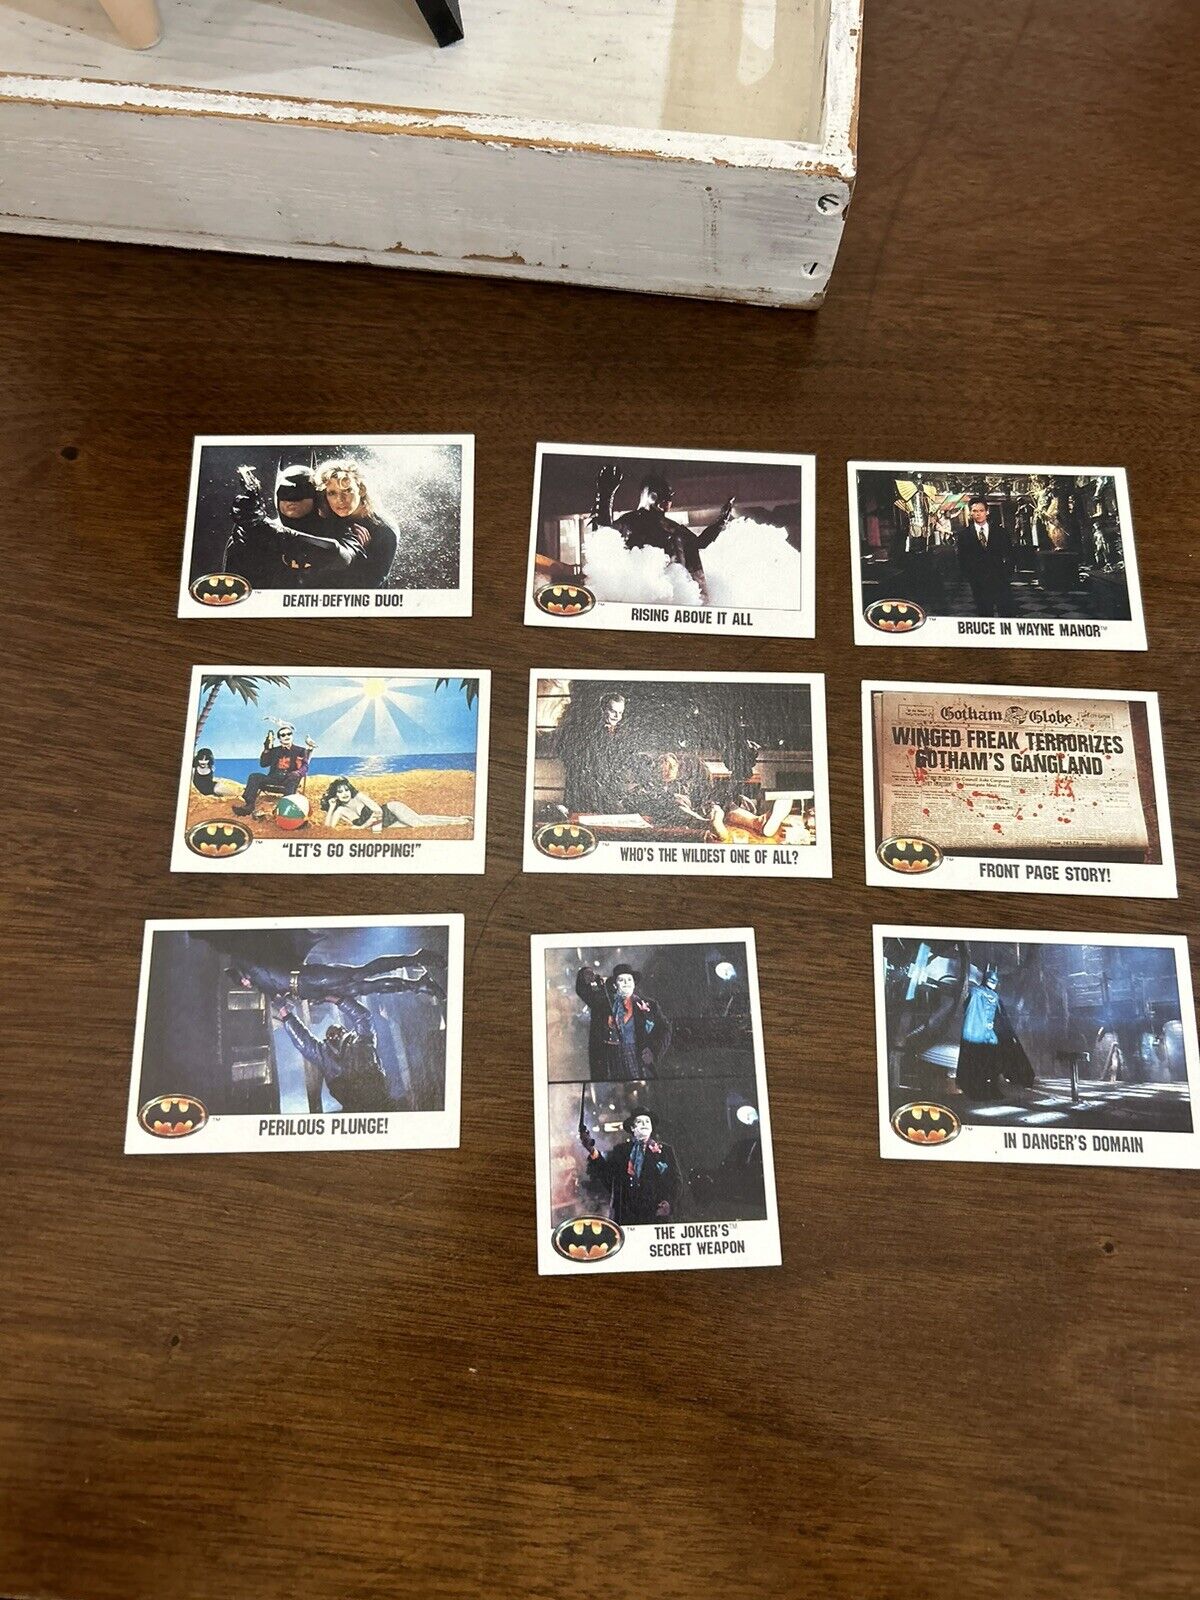 Vintage 1989 Batman Movie Trading Card Lot Of 9 Cards, AMAZING CONDITION